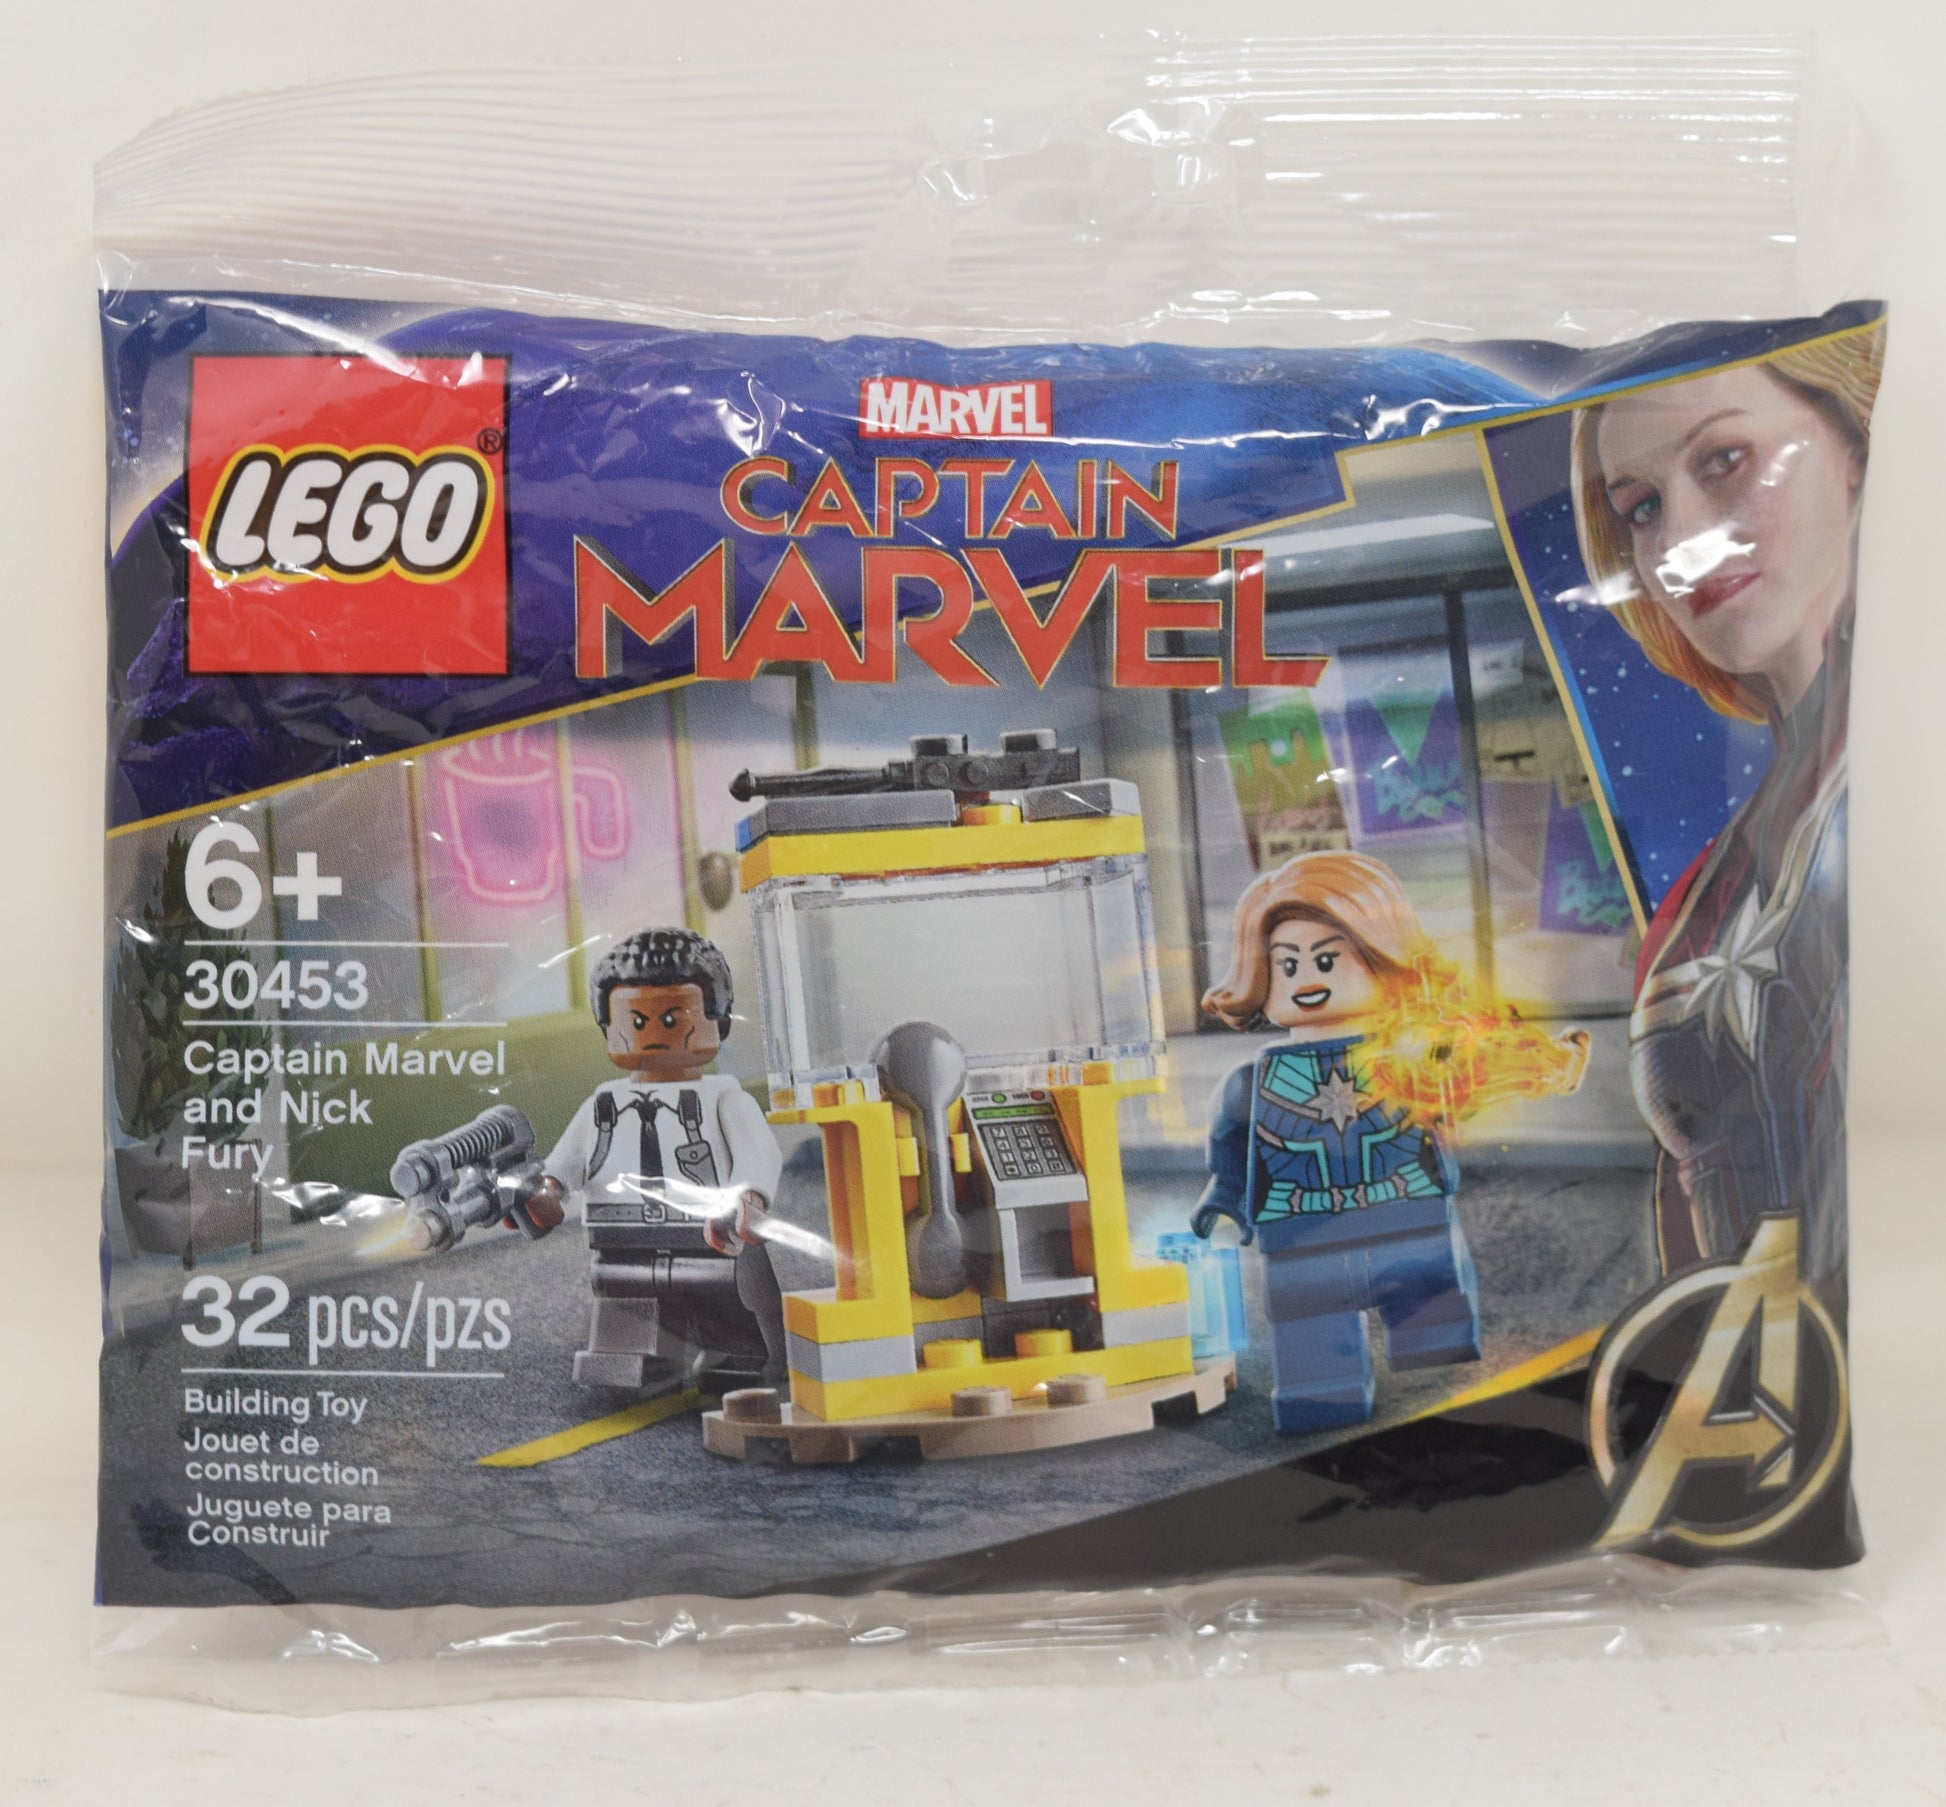 Lego 30453 - Captain Marvel and Nick Fury